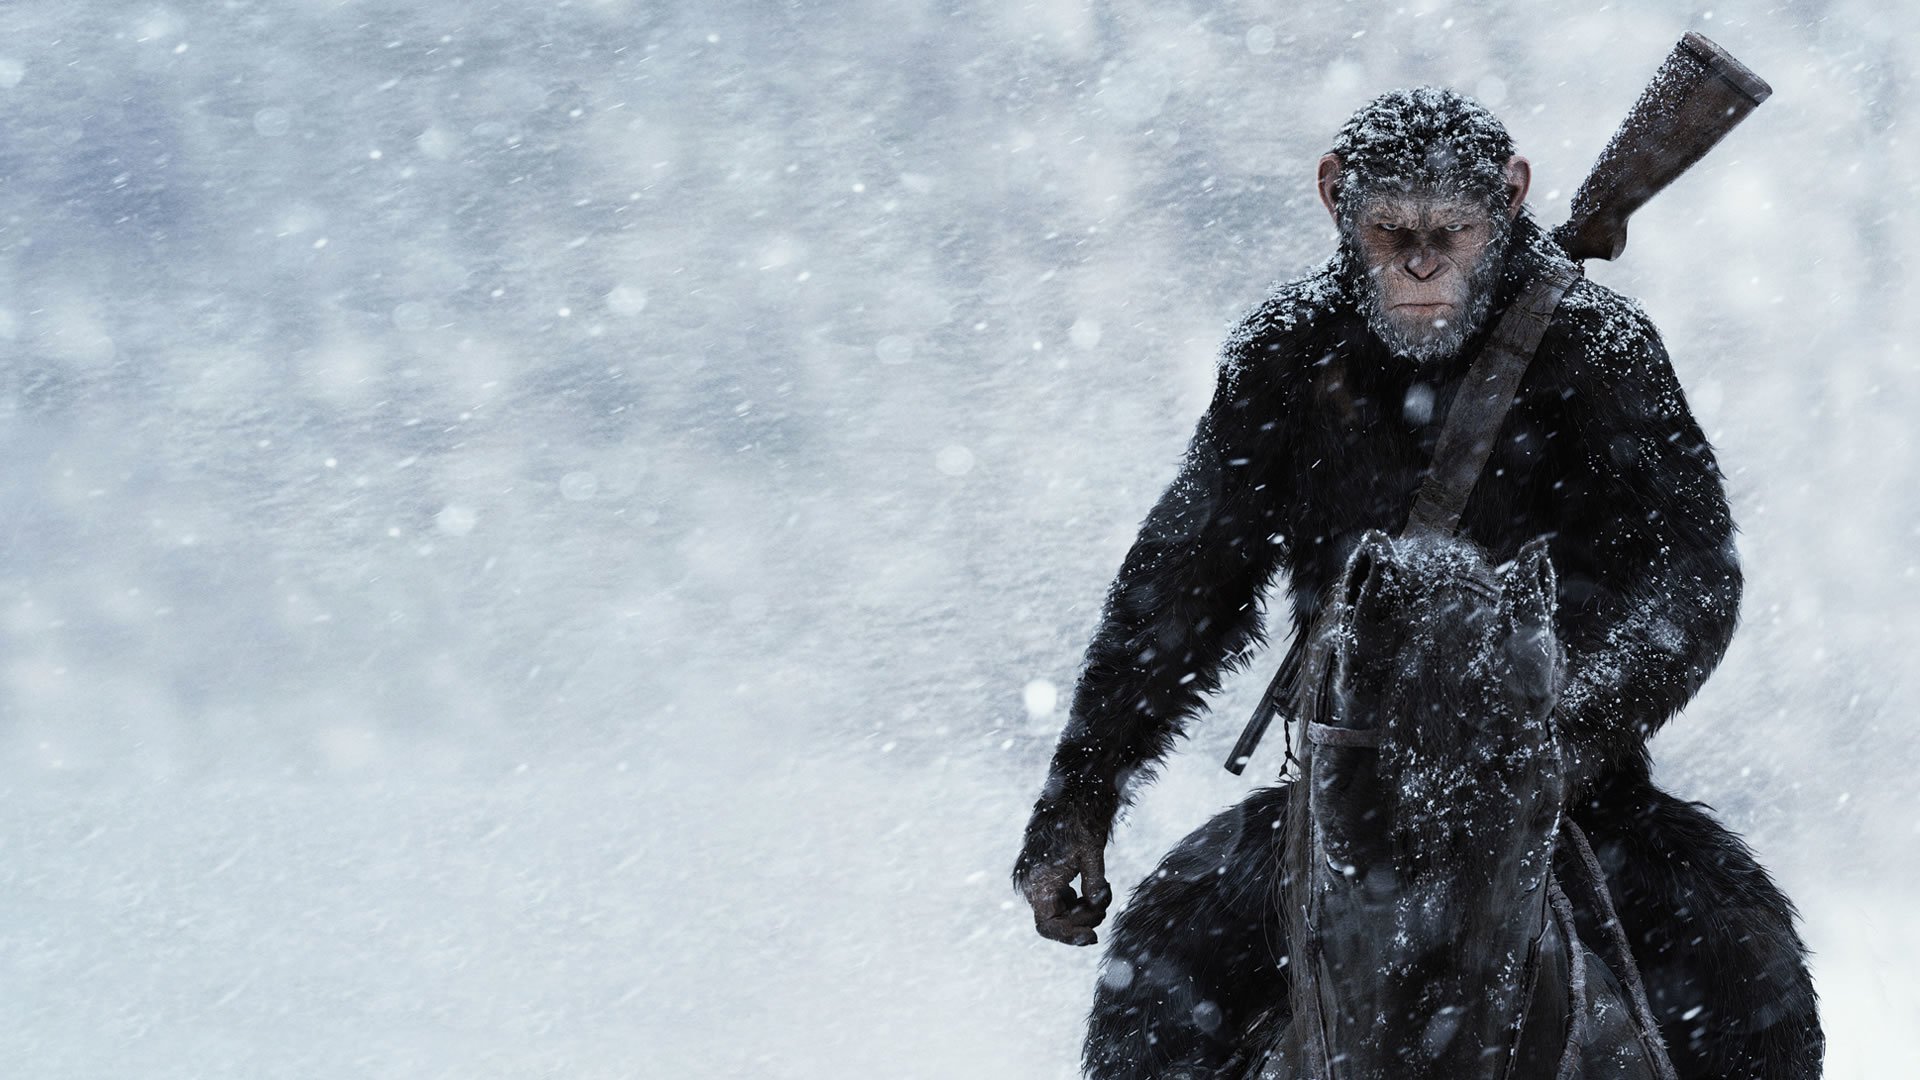 Movies Rise of the Planet of the Apes wallpaper  1920x1080  216290   WallpaperUP